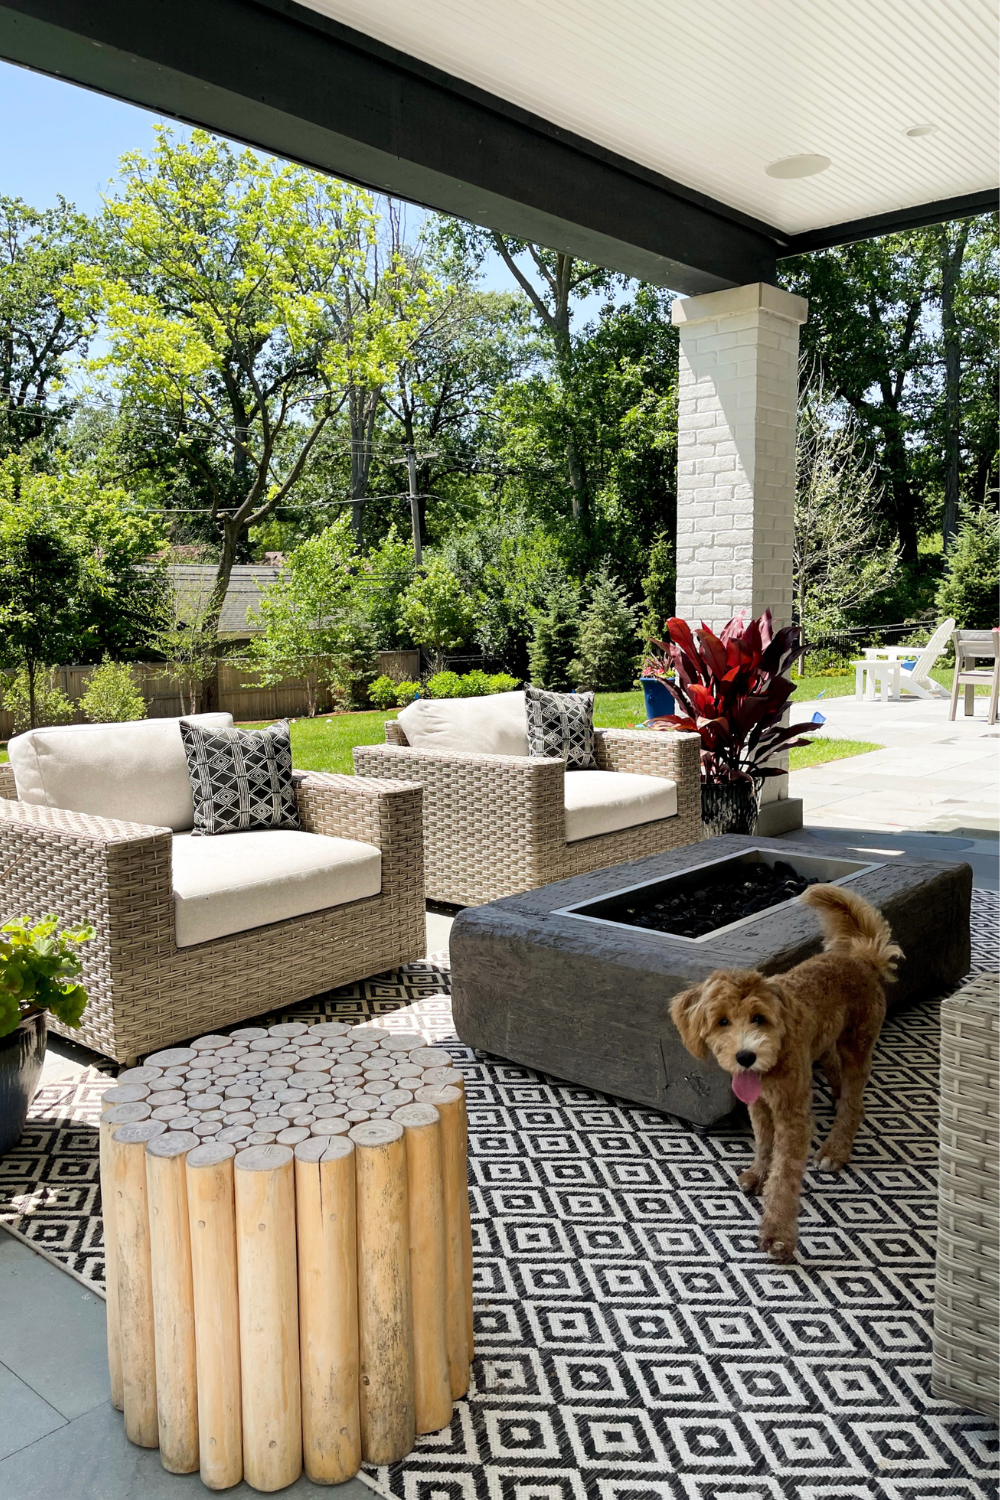 Suzanne's dog, Georgia, in her outdoor space